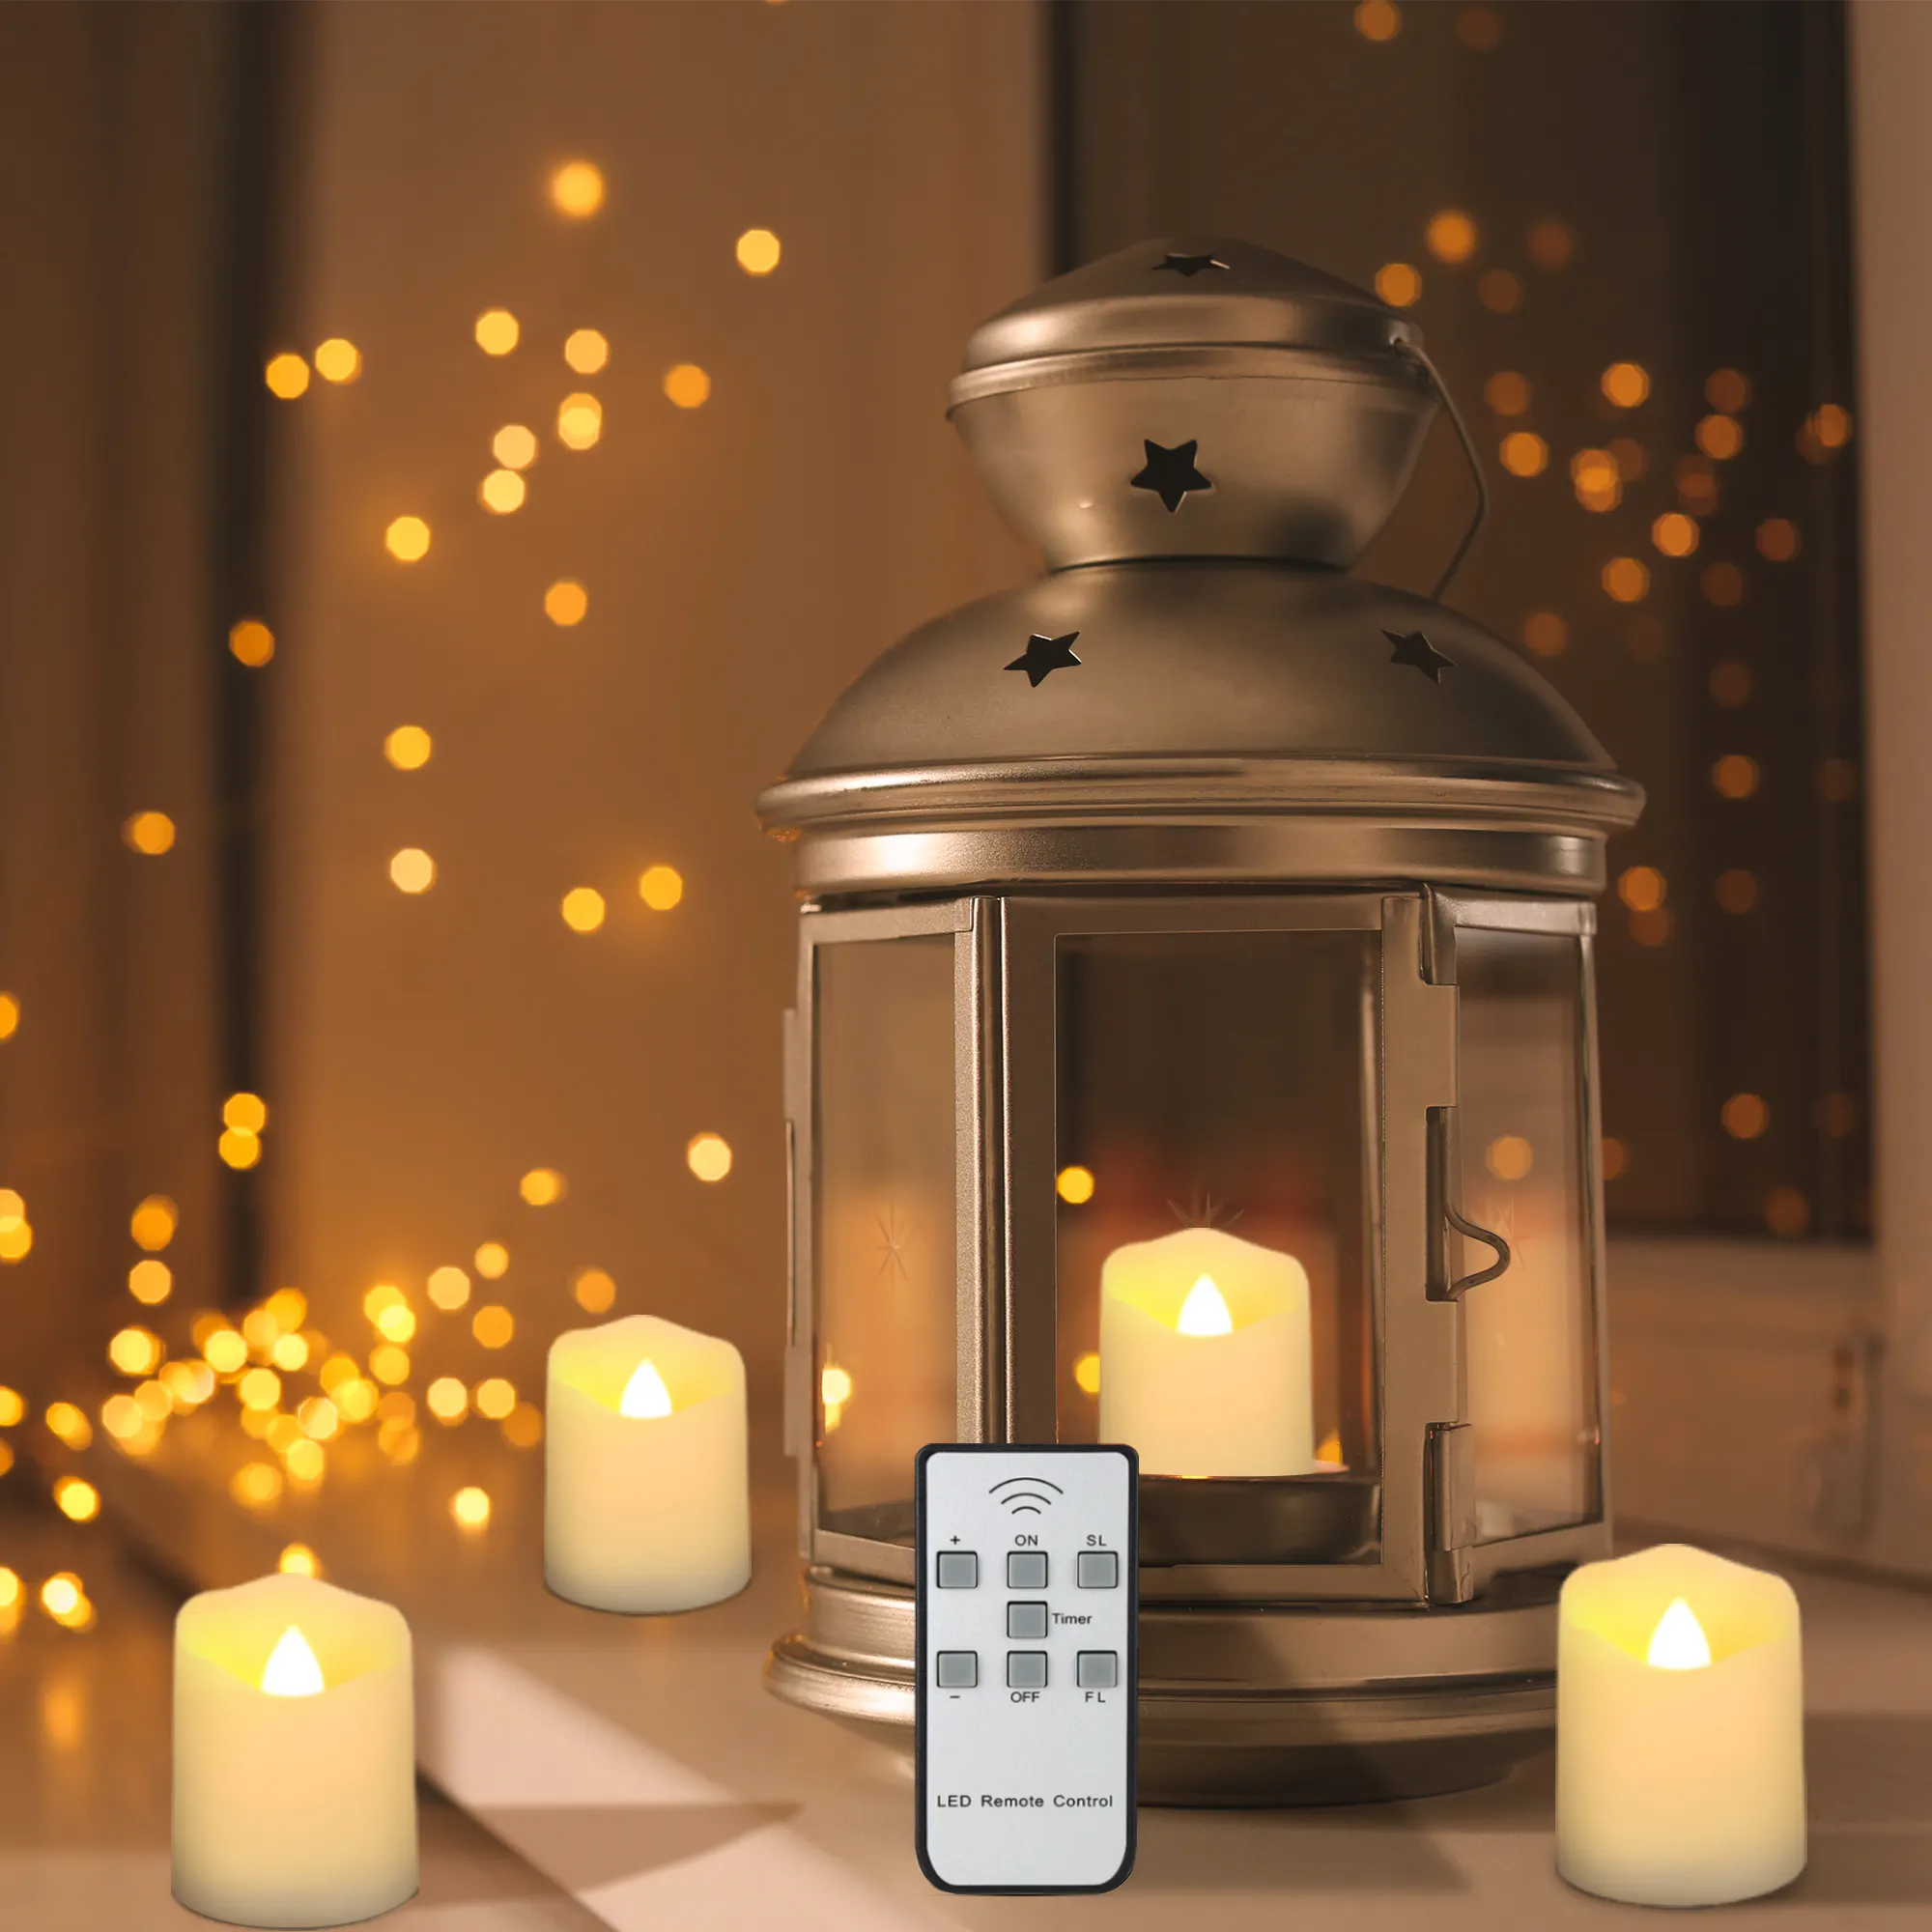 Rechargeable tea light flameless moving wick led candle